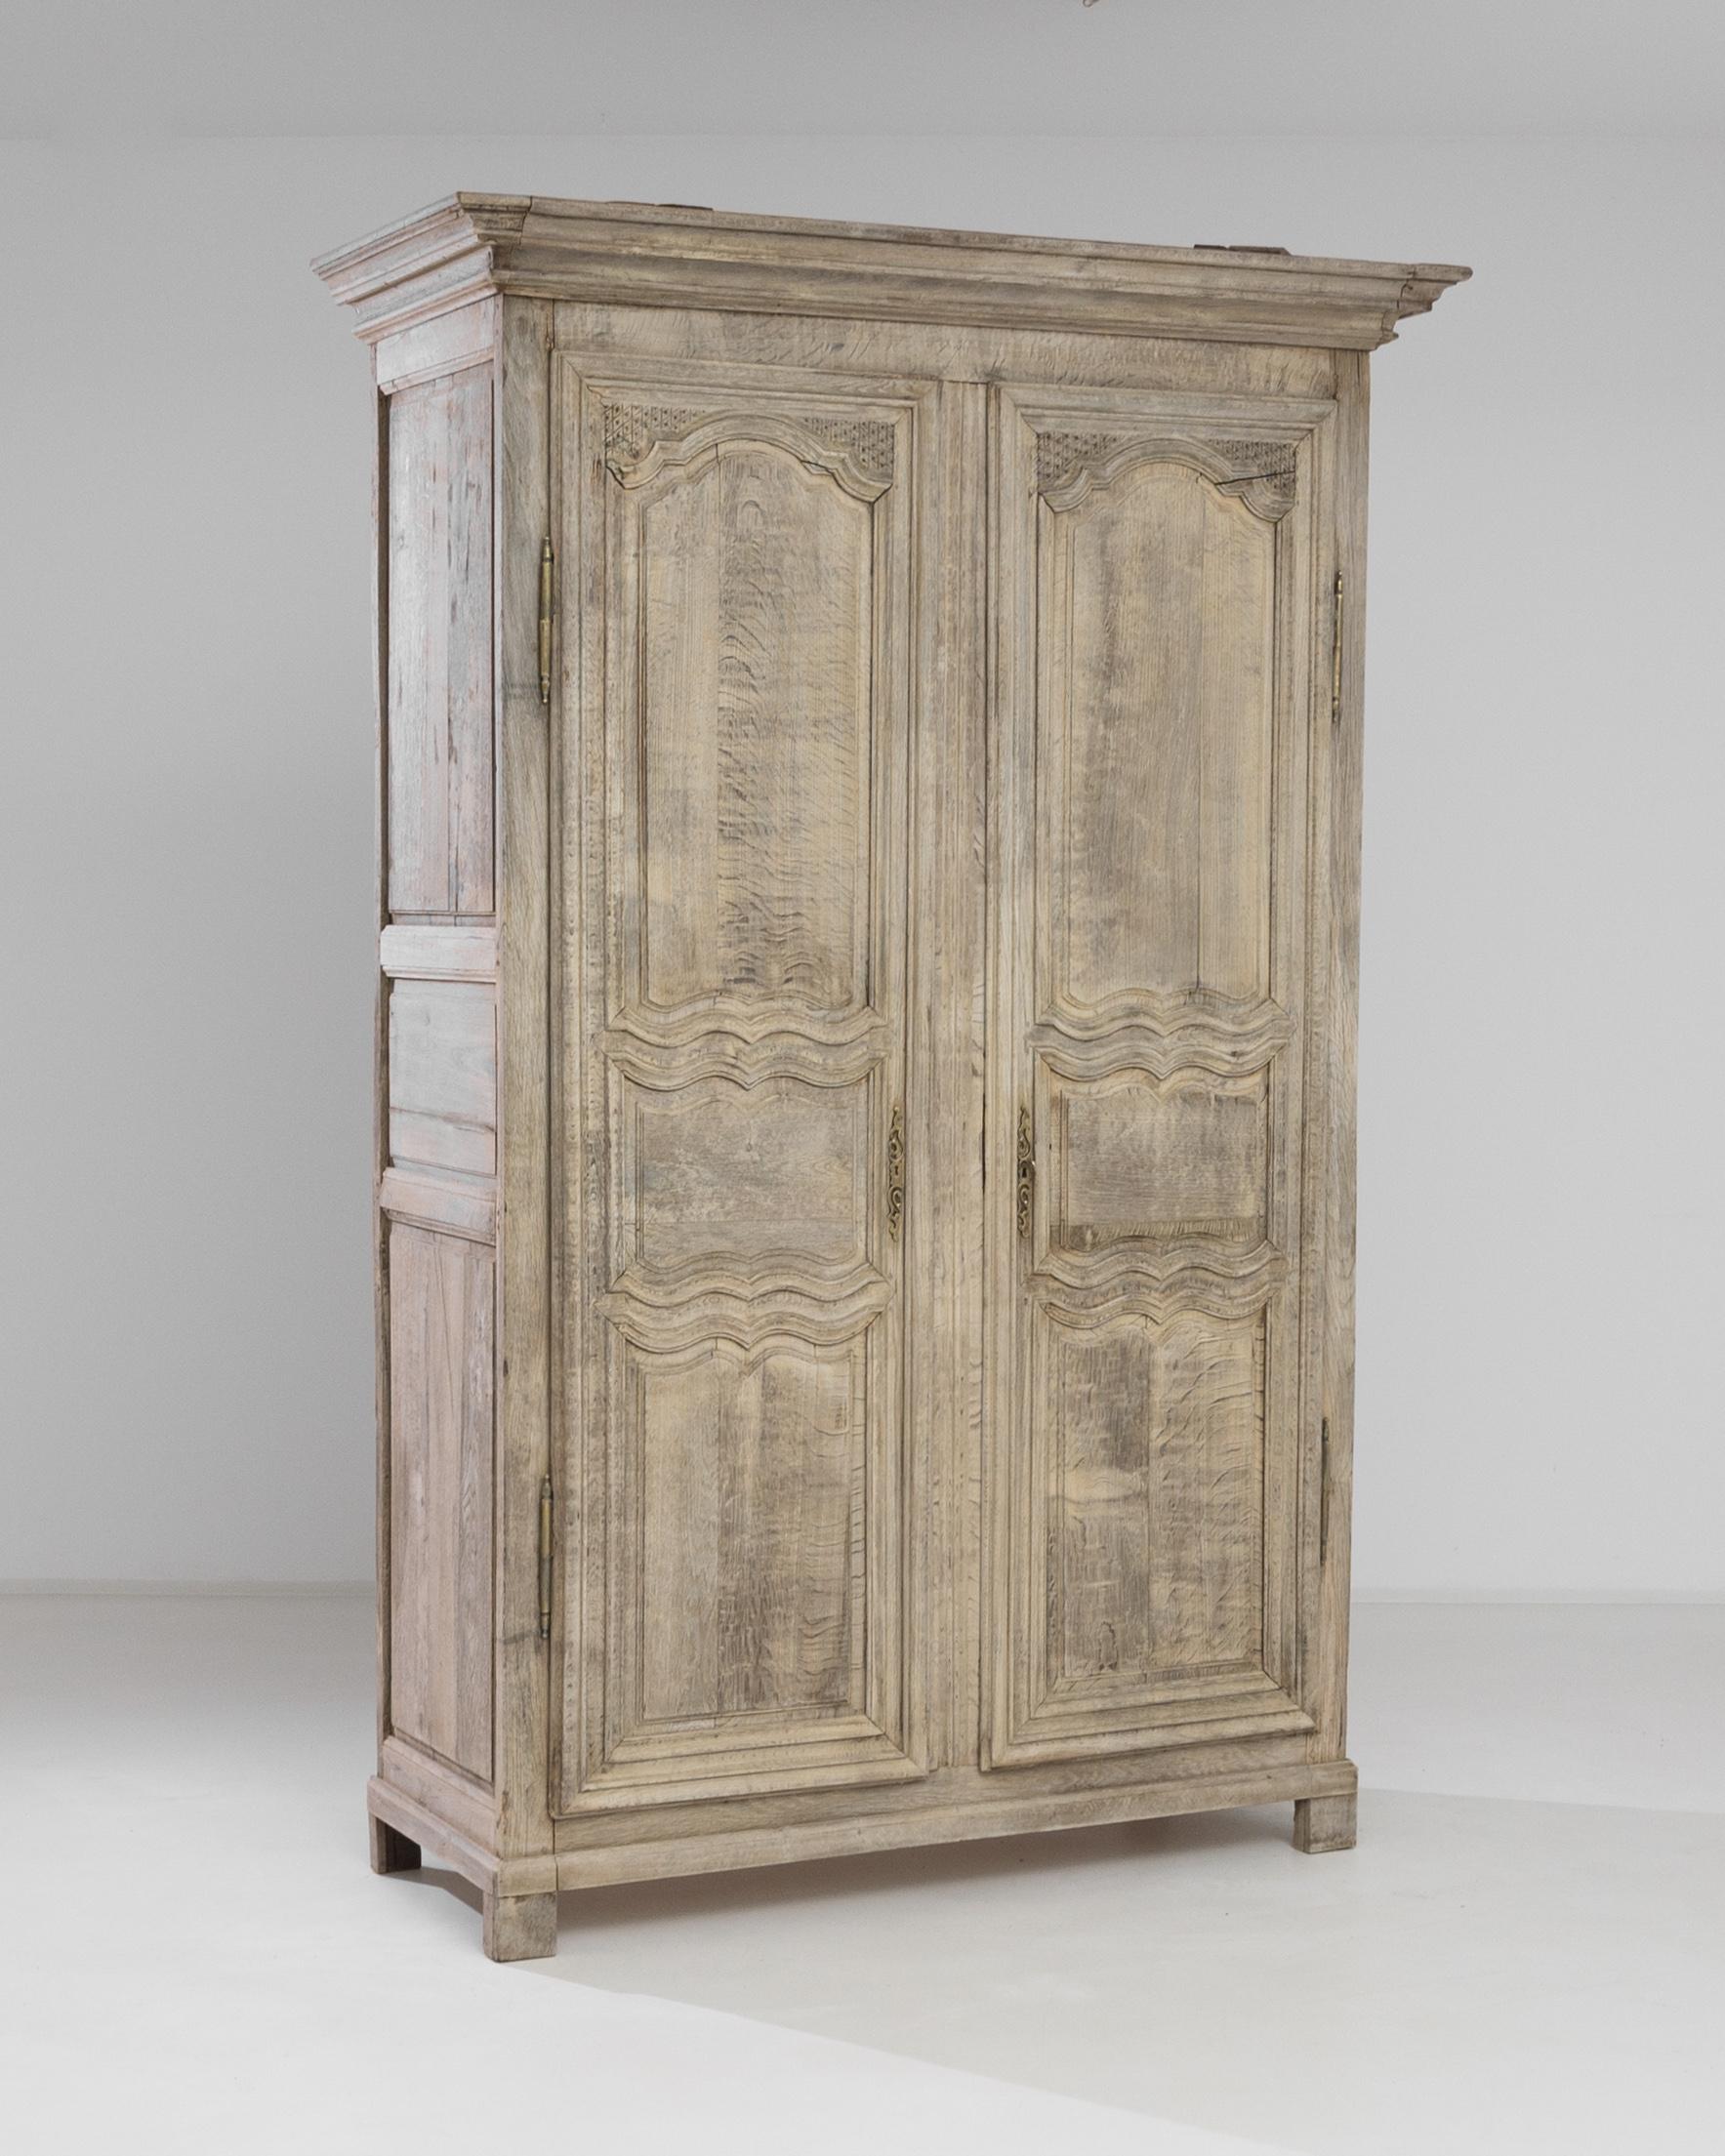 This tall armoire was crafted in France, circa 1800. Standing on bracket feet, this antique treasure features a molded cornice, gilded hardware and a carved case. The doors are ornamented with undulating beveled lines and discrete embossed fleurets